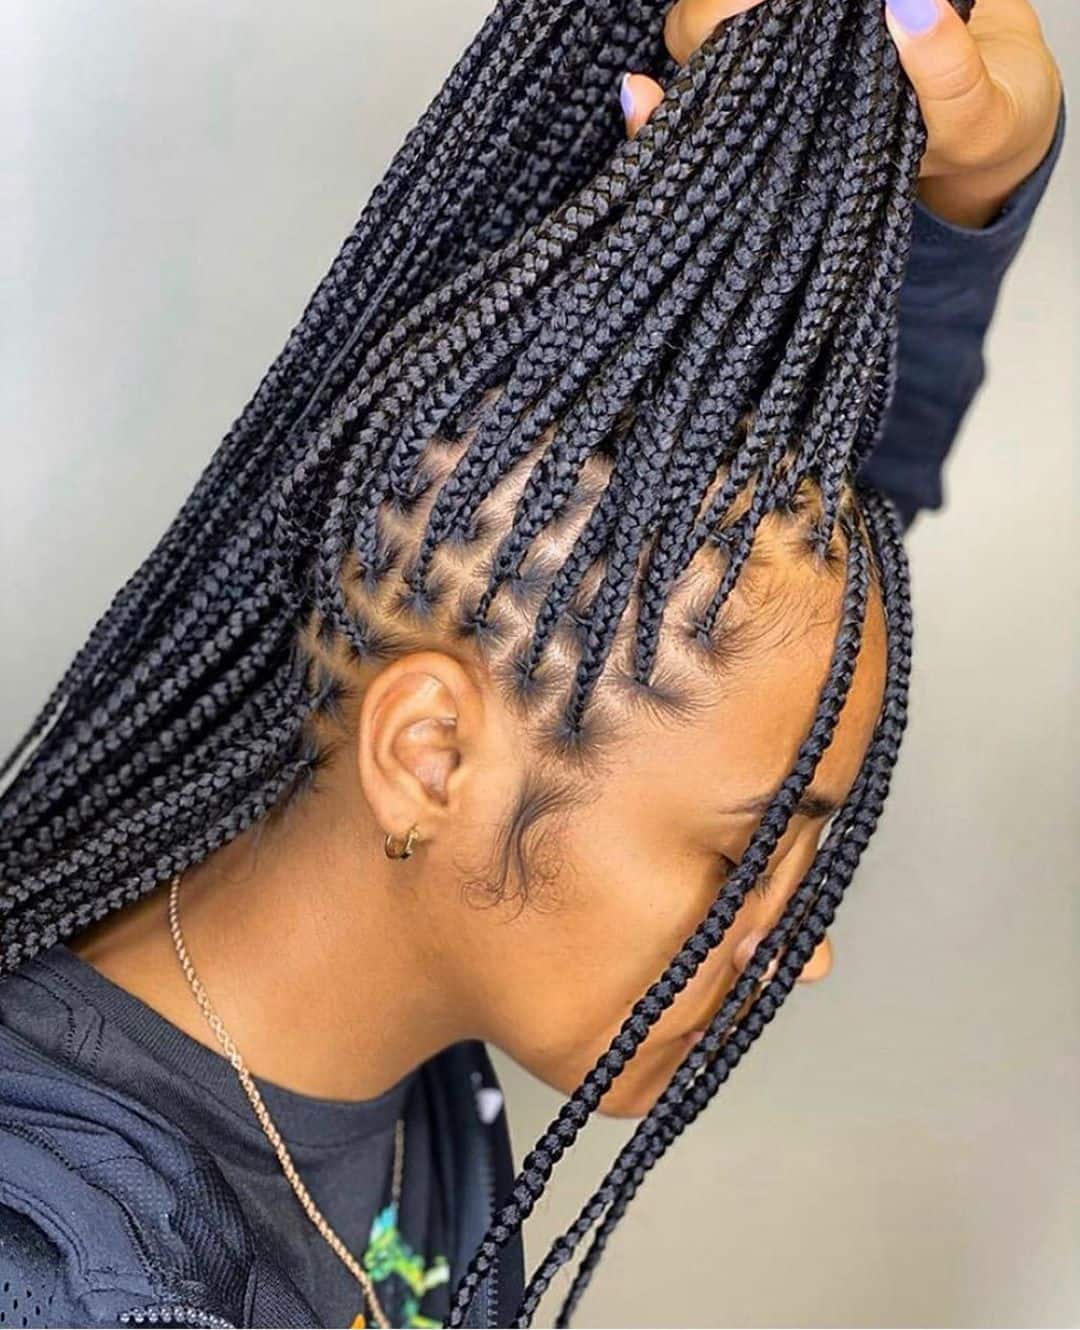 RELATED POSTS 40 Attractive Long Box Braids Hairstyles for Limitless  Beauty! 75 Attractive Gypsy Goddess Locs Hairstyles on Black Women 5... |  Instagram